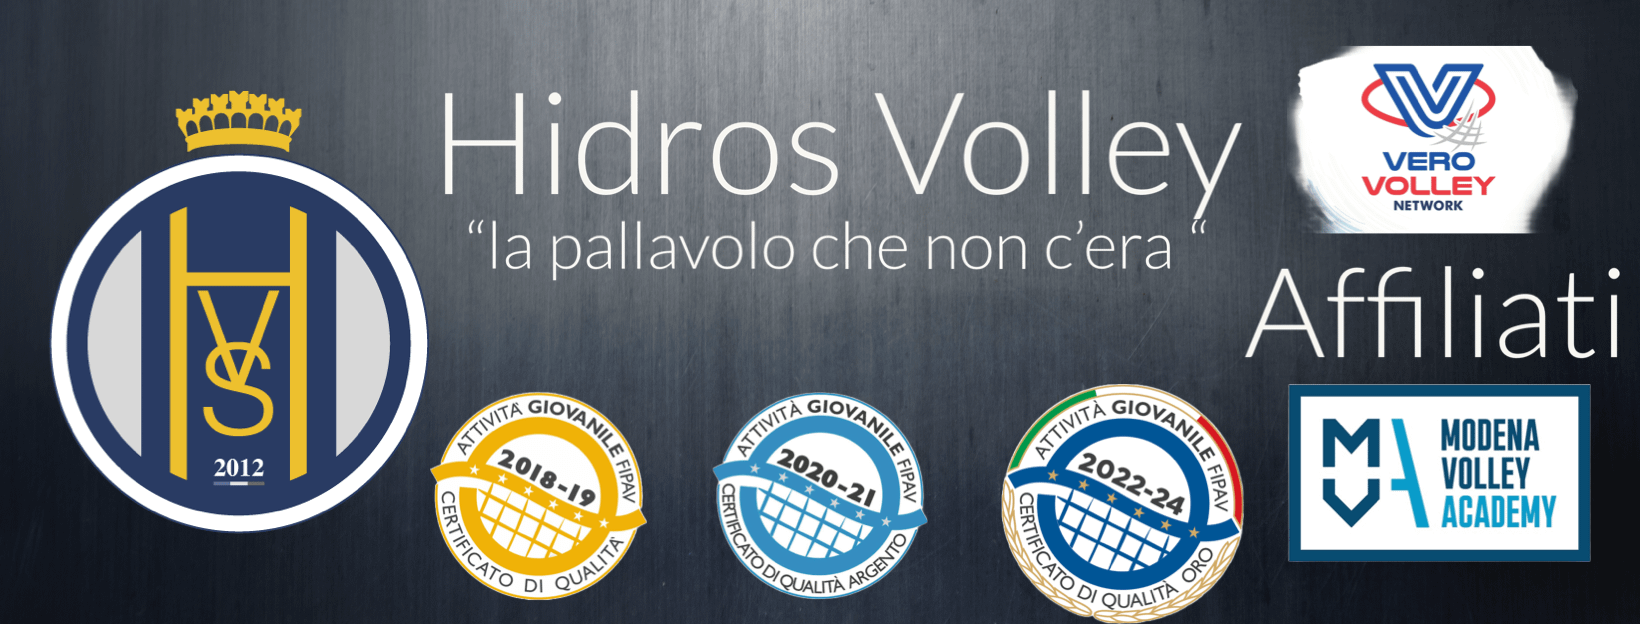 Hidros Volley S. Arpino A.S.D.